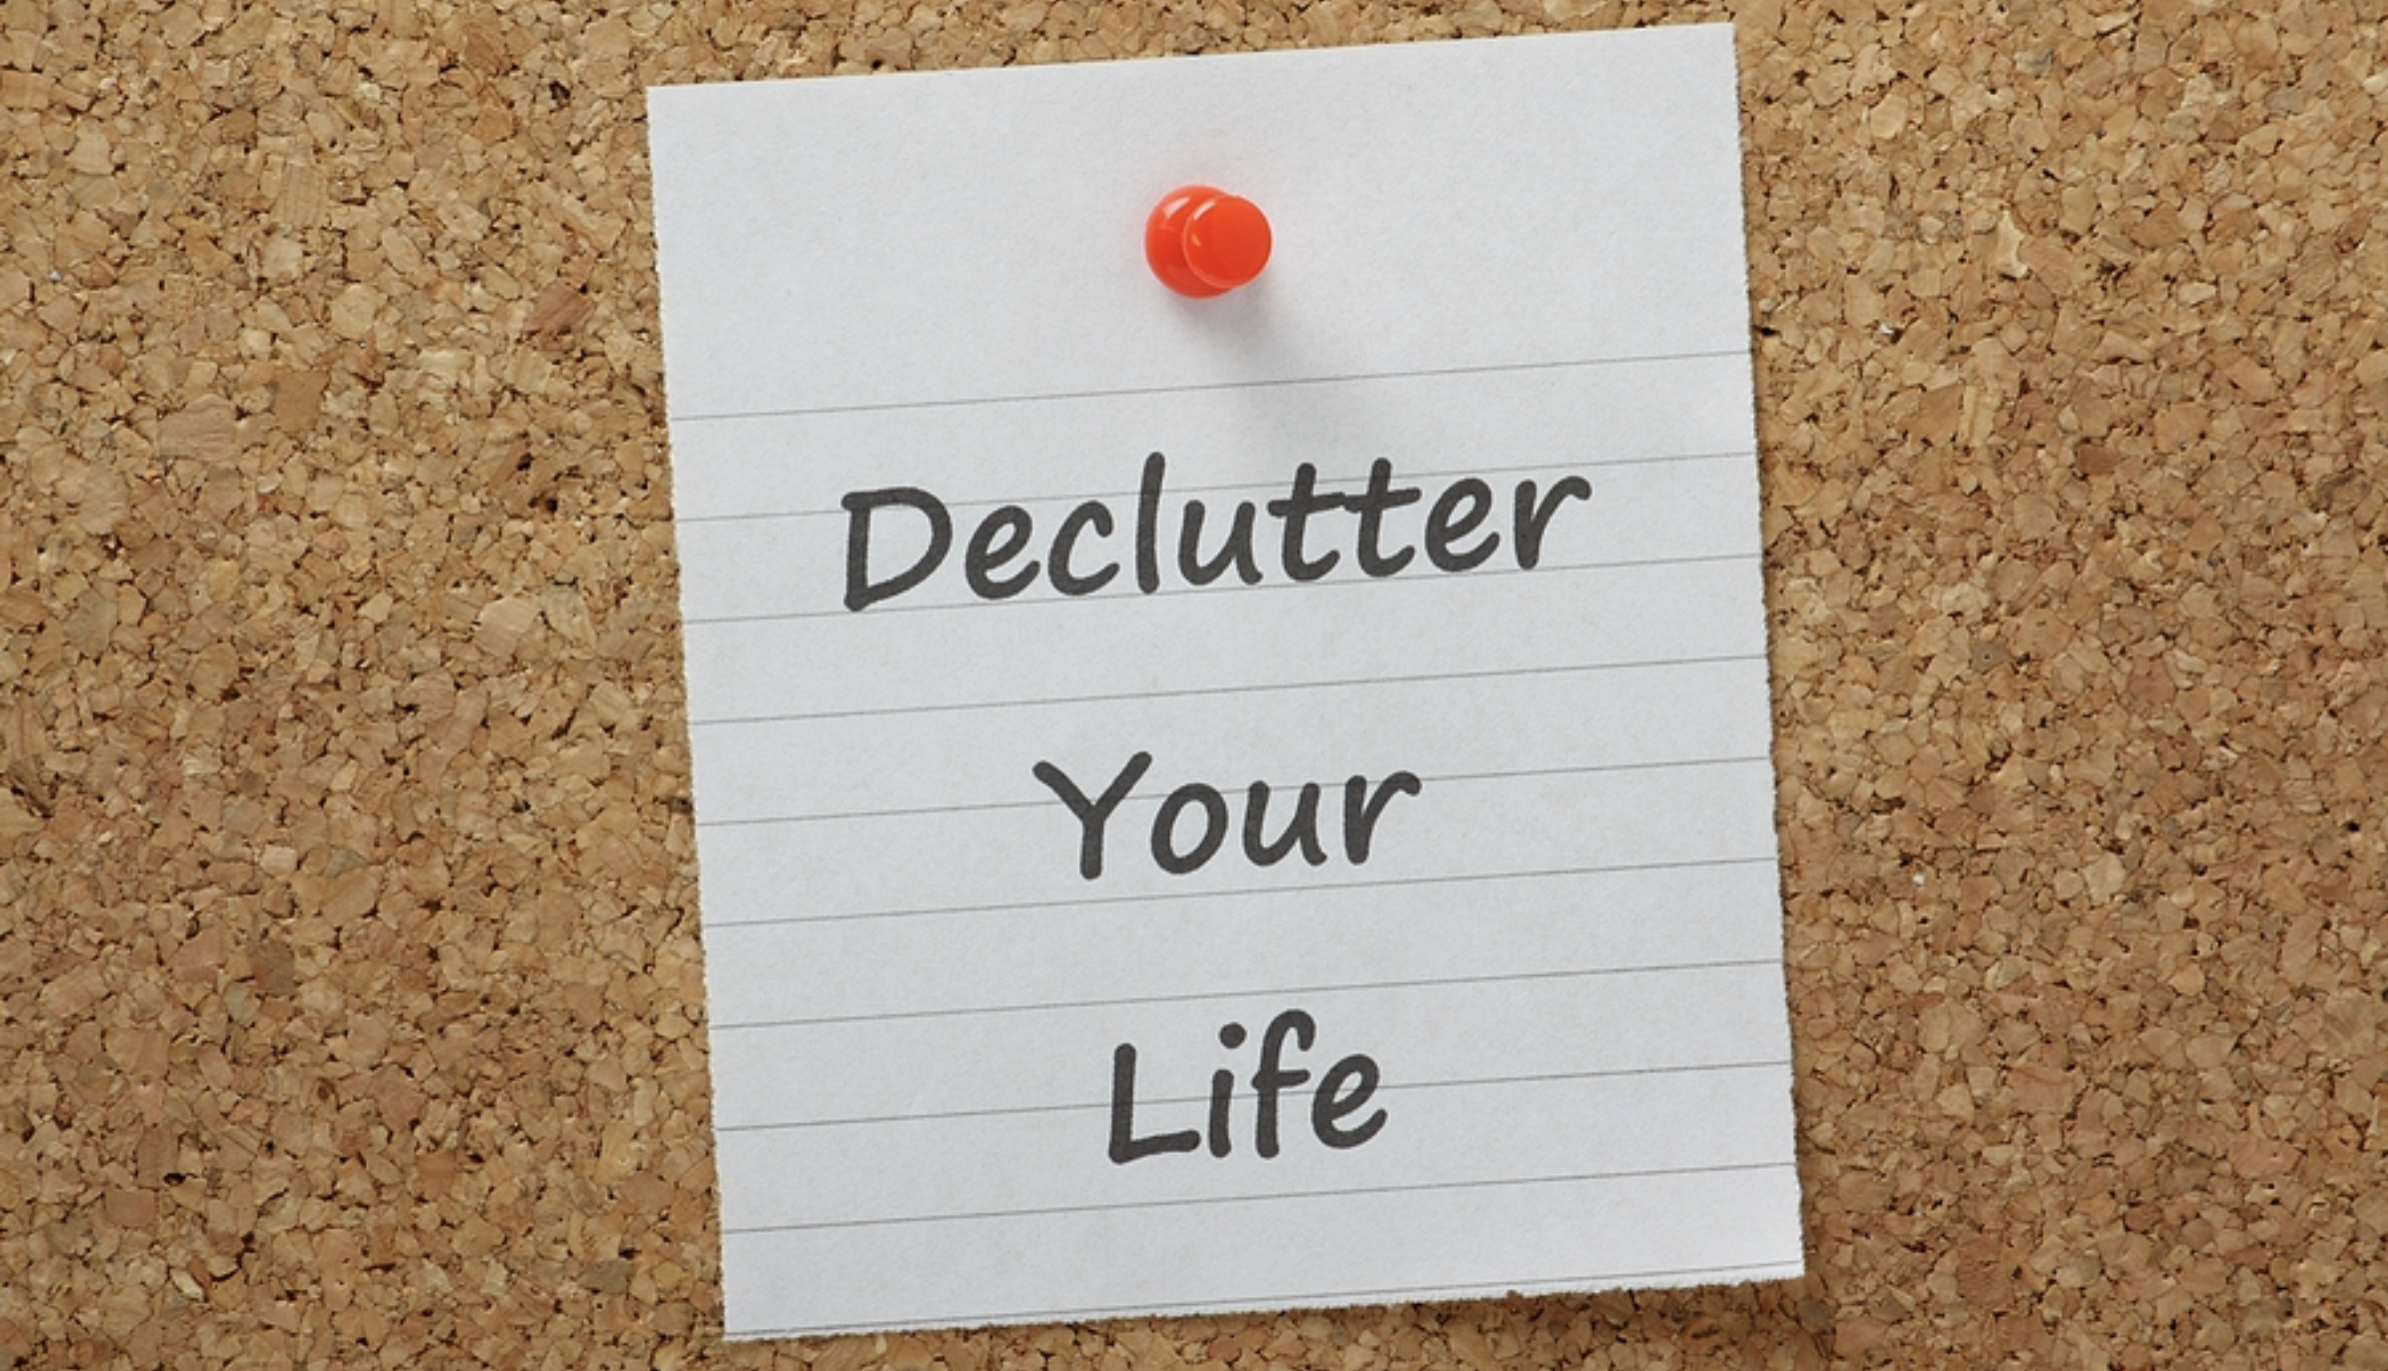 DeClutter Your Life